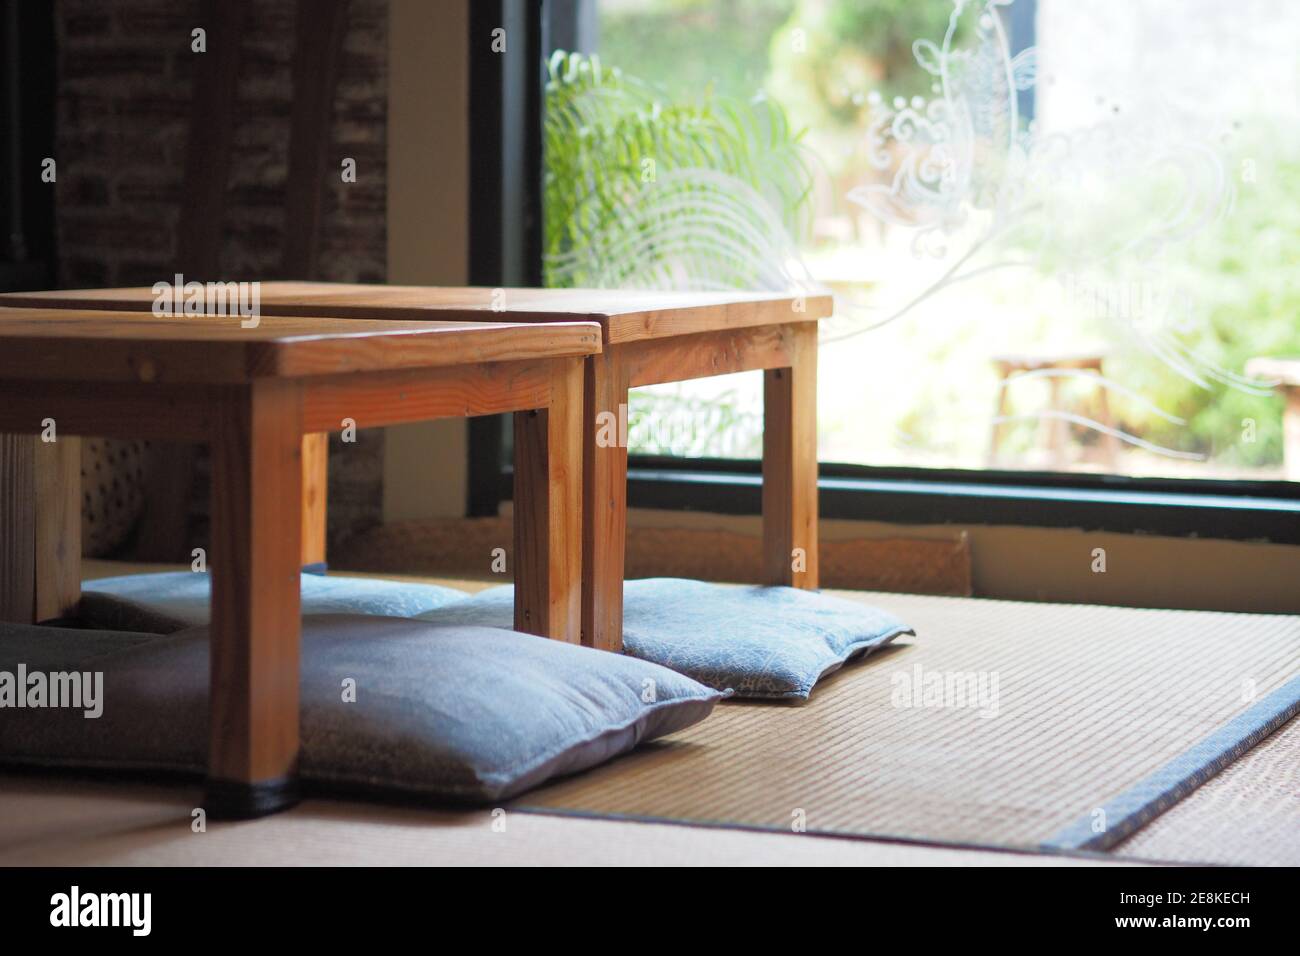 Japanese-style room decoration with wooden tables and sitting cushions floor, Green garden background. Stock Photo